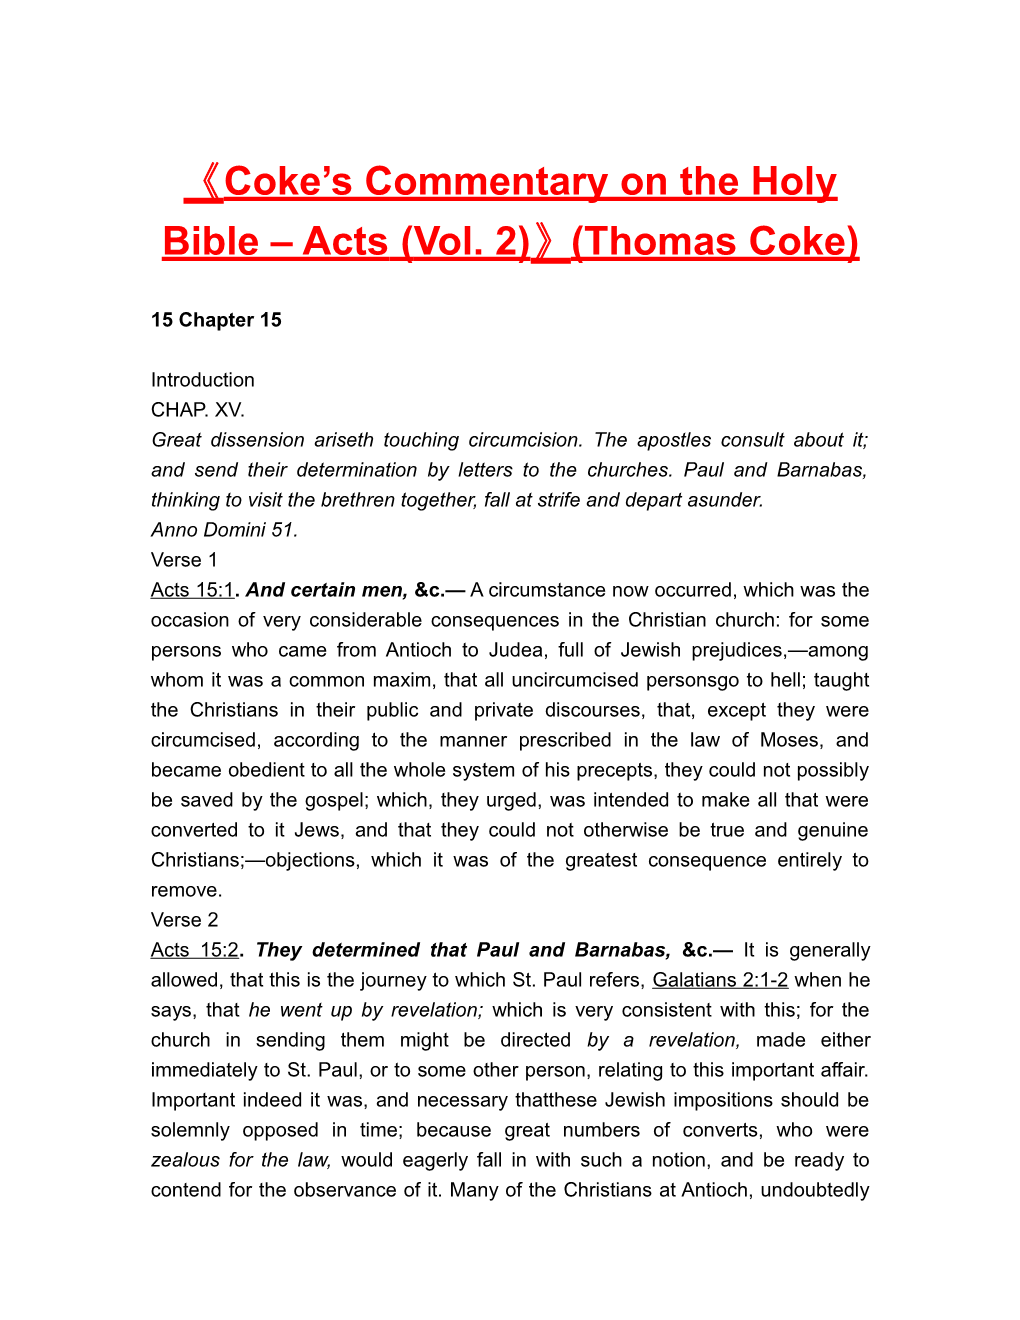 Coke S Commentary on the Holy Bible Acts (Vol. 2) (Thomas Coke)